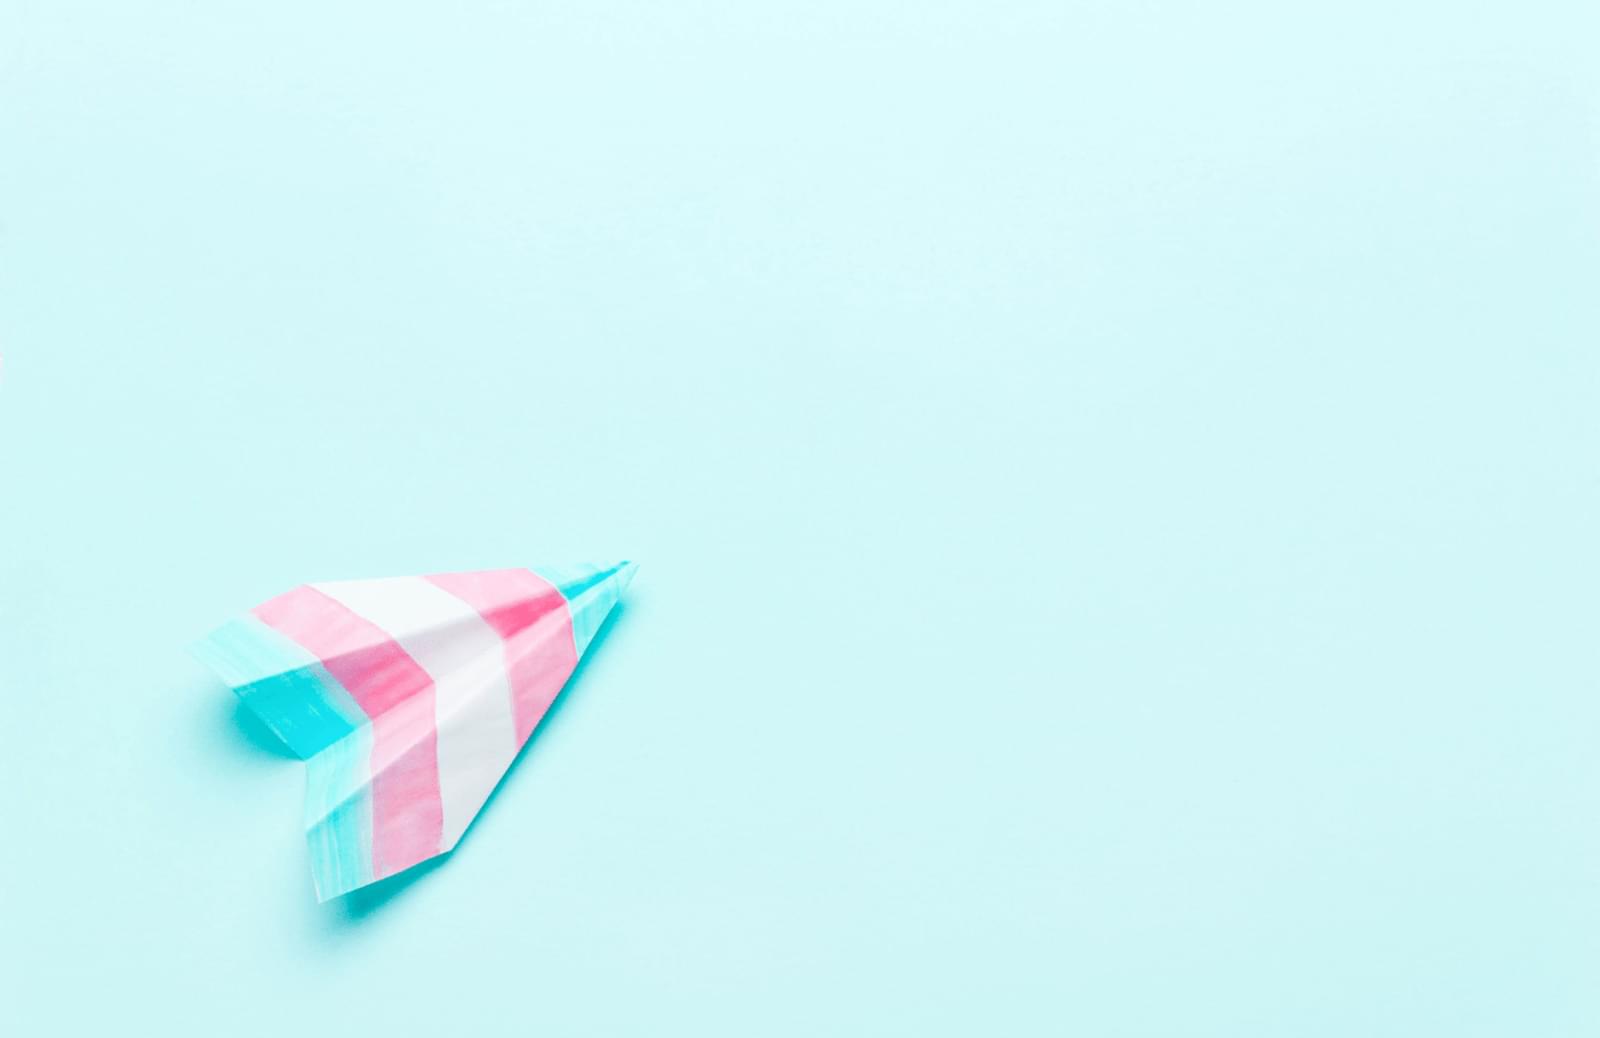 A paper airplane with the colors of the transgender flag on it is folded and pointed upright on a plain teal background